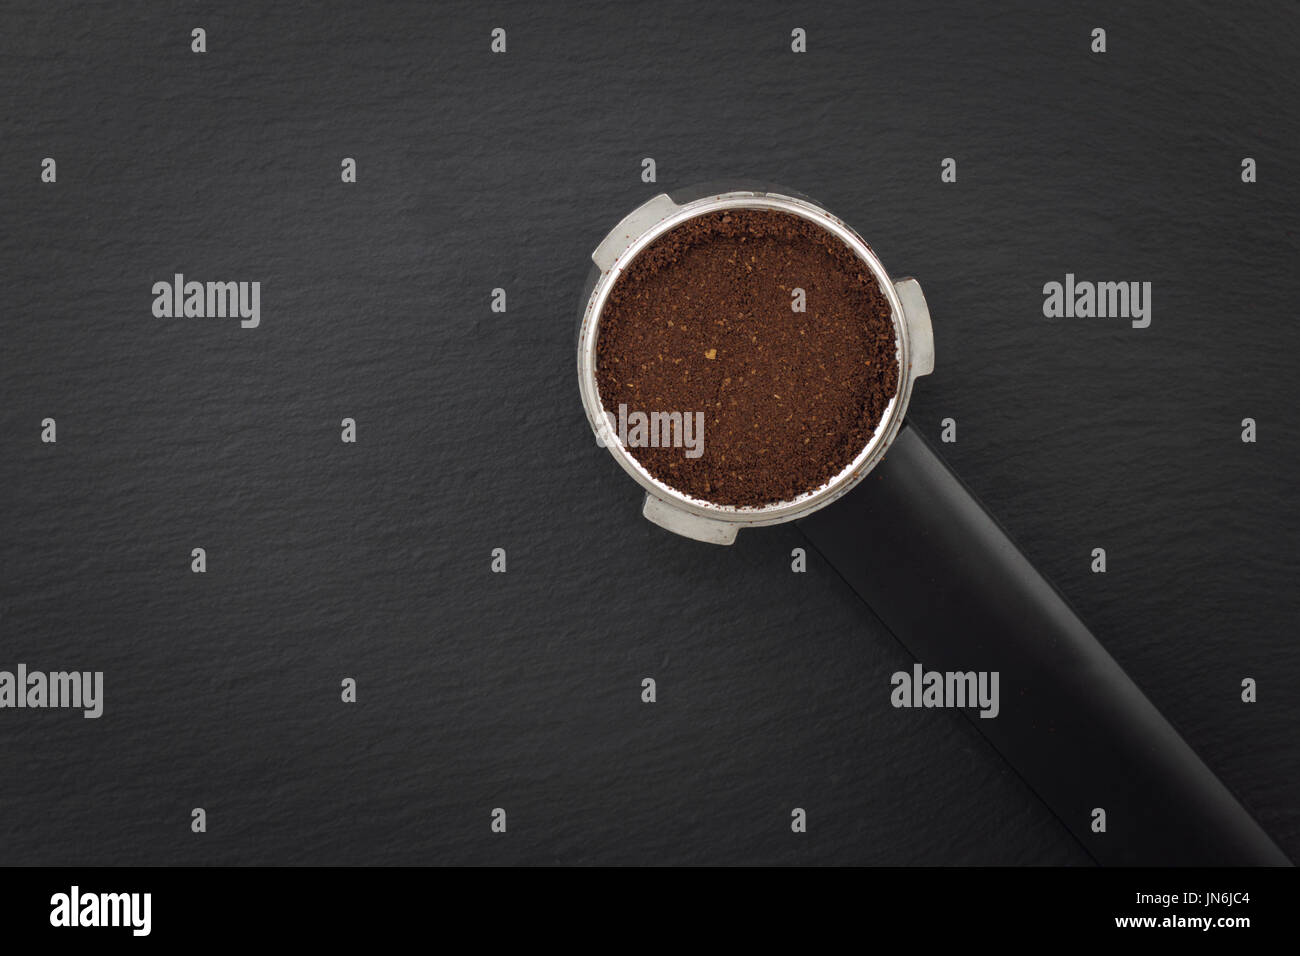 Espresso filter holder for coffee machine  on Black background with copy space Stock Photo